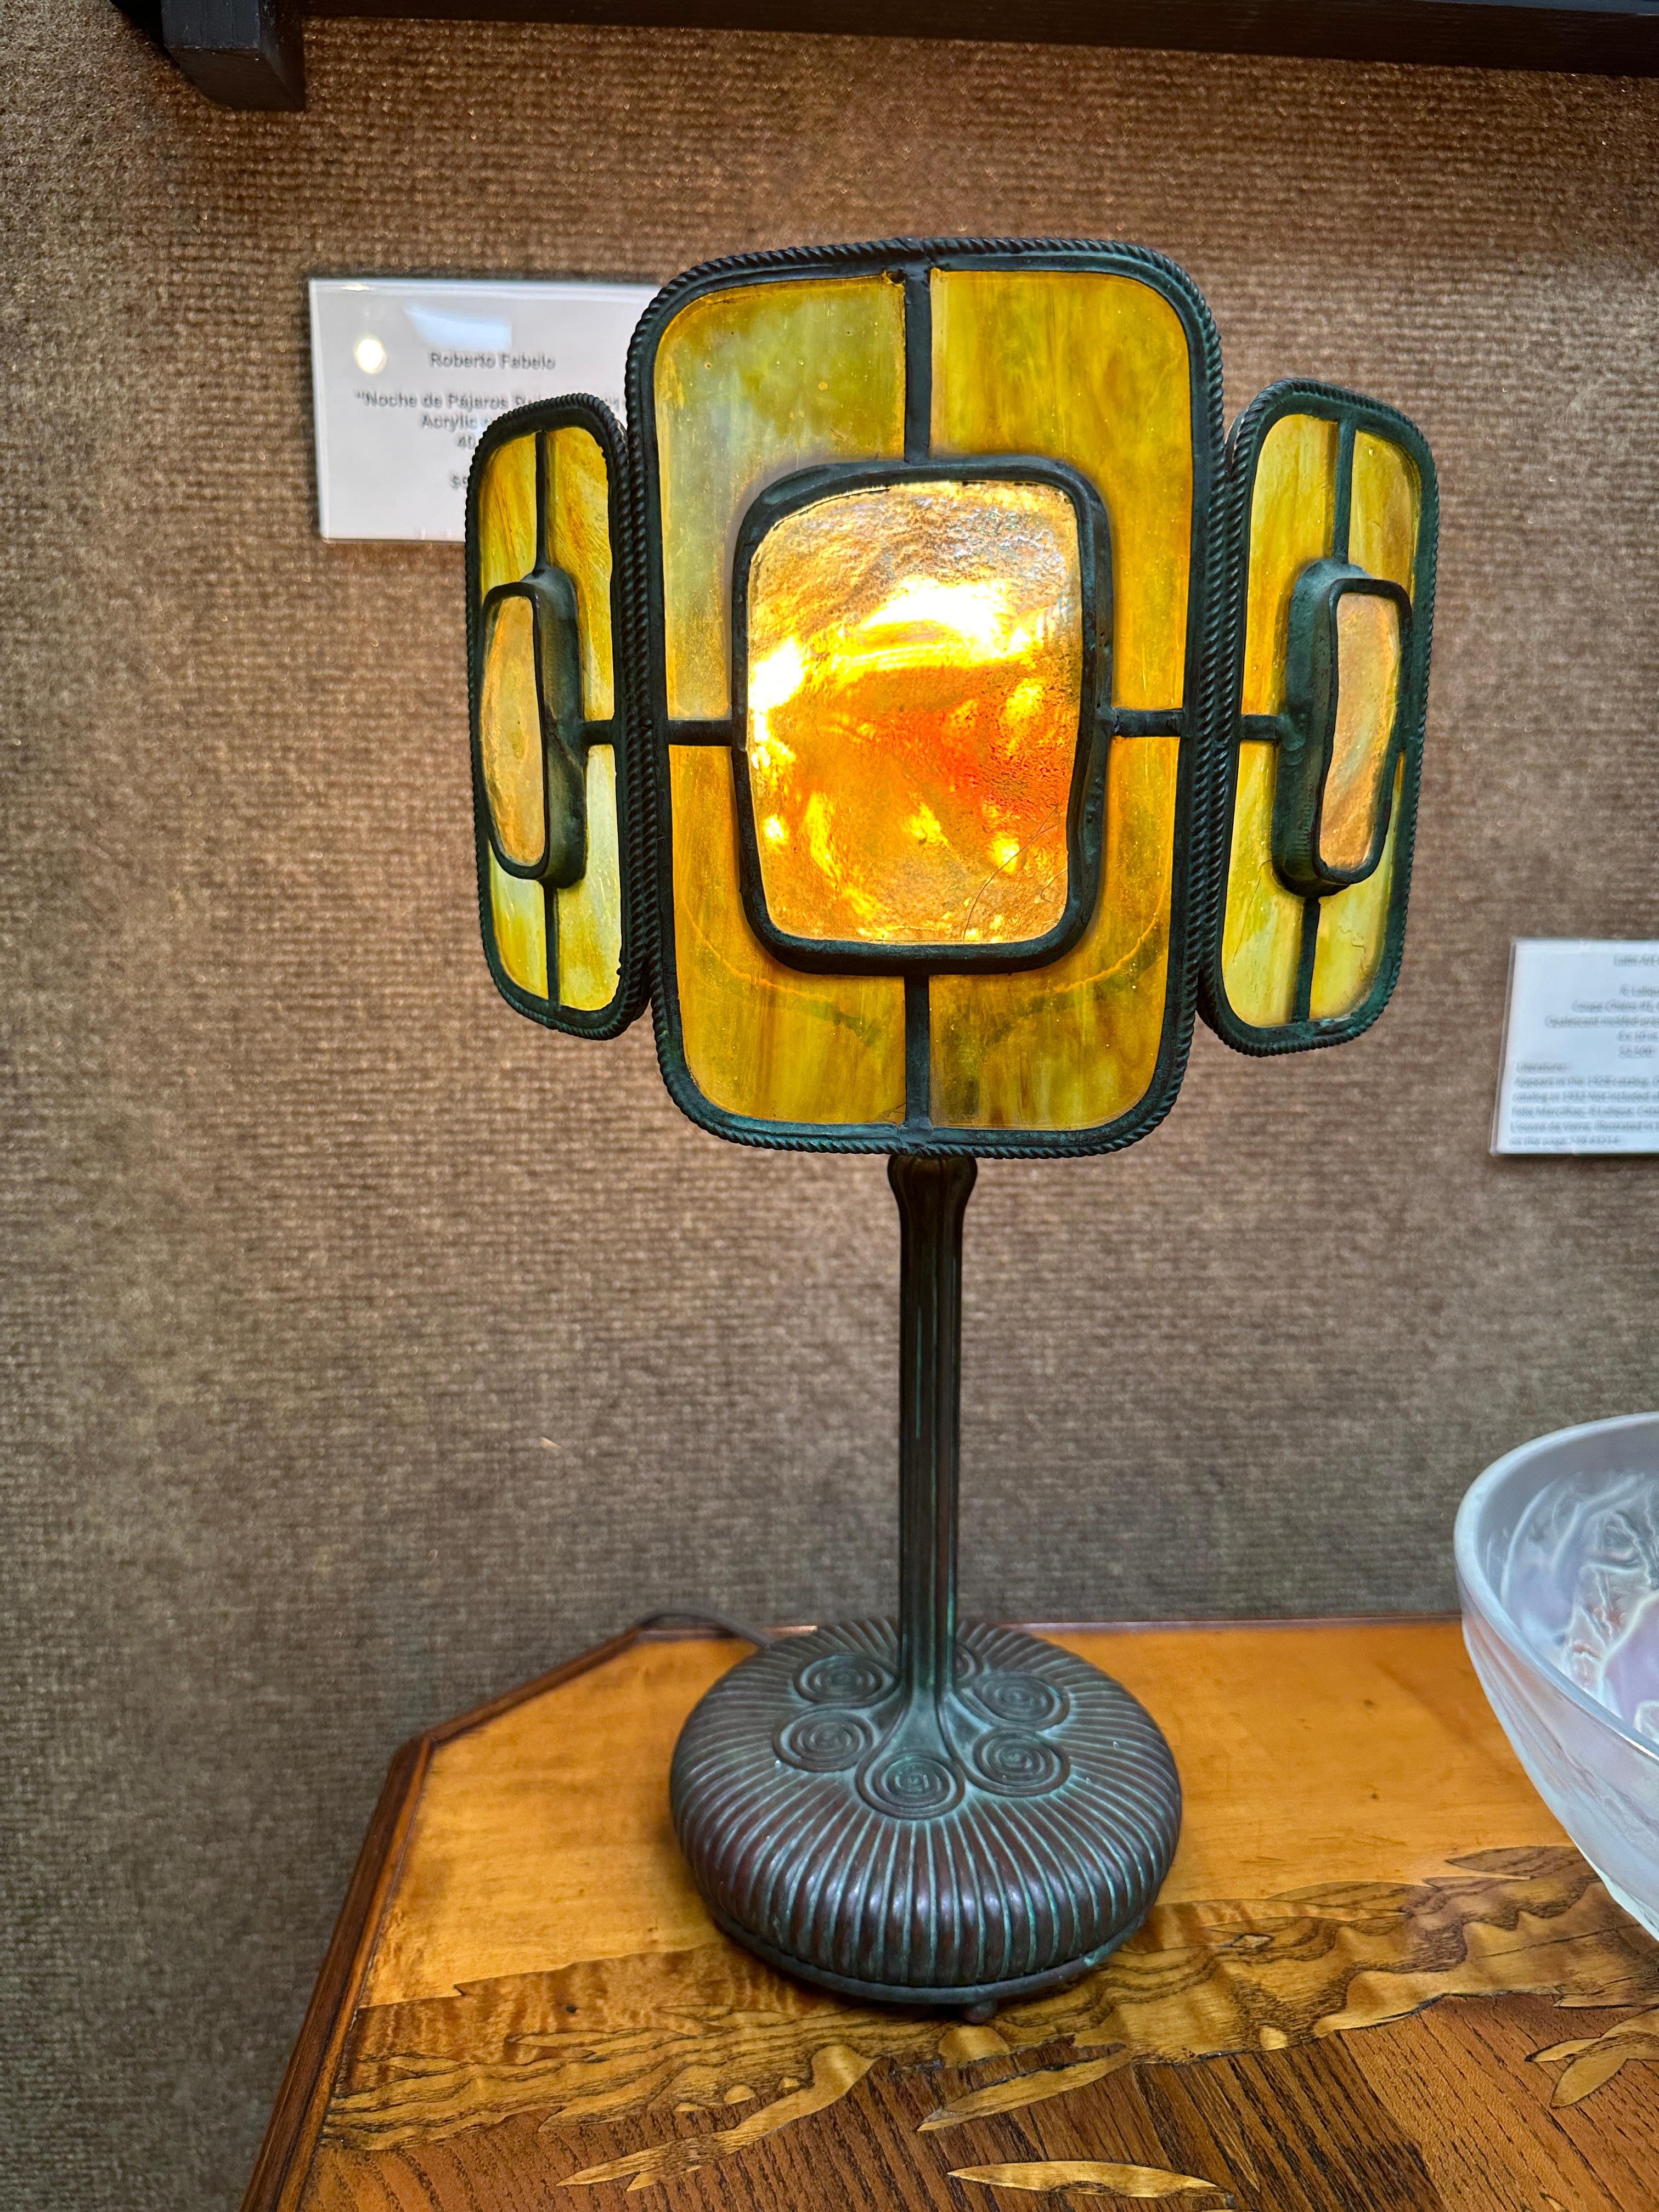 Louis Comfort Tiffany
“Turtle-Back” desk lamp, 1905 ca.
Patinated bronze and marbled glass.
14 in high
Shade marked 